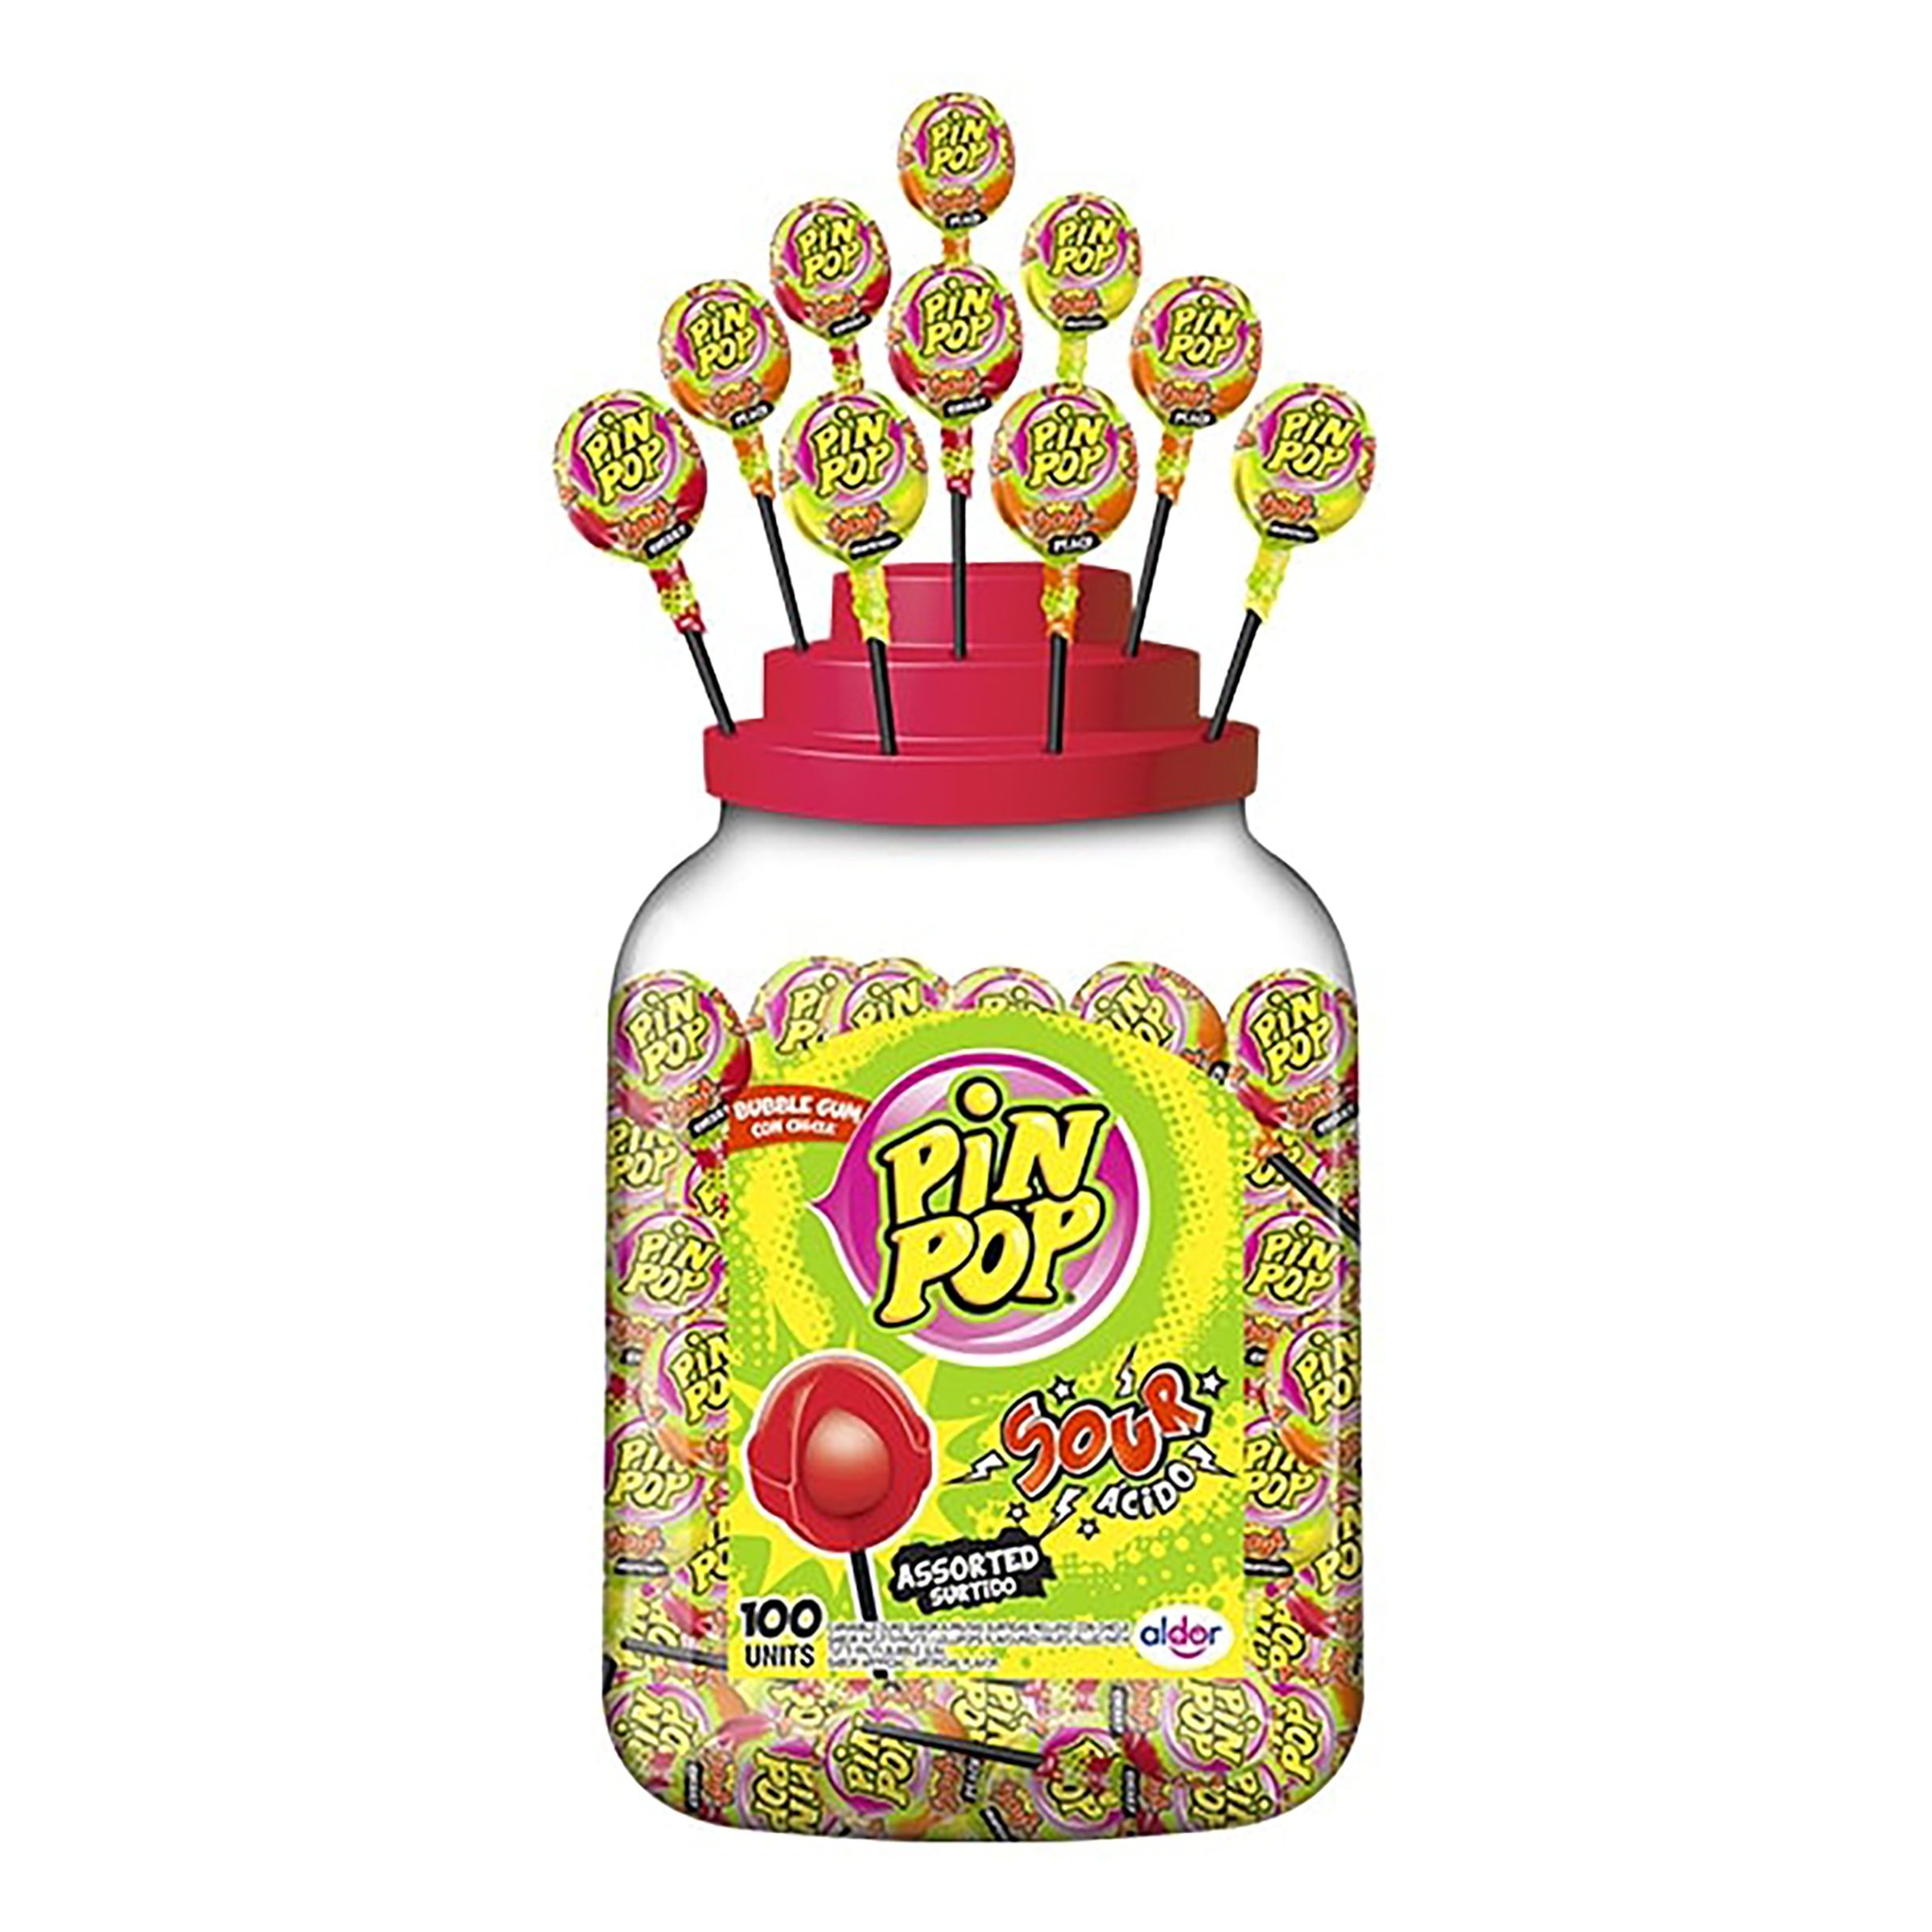 Pin Pop Sour Storpack - 1.8 kg